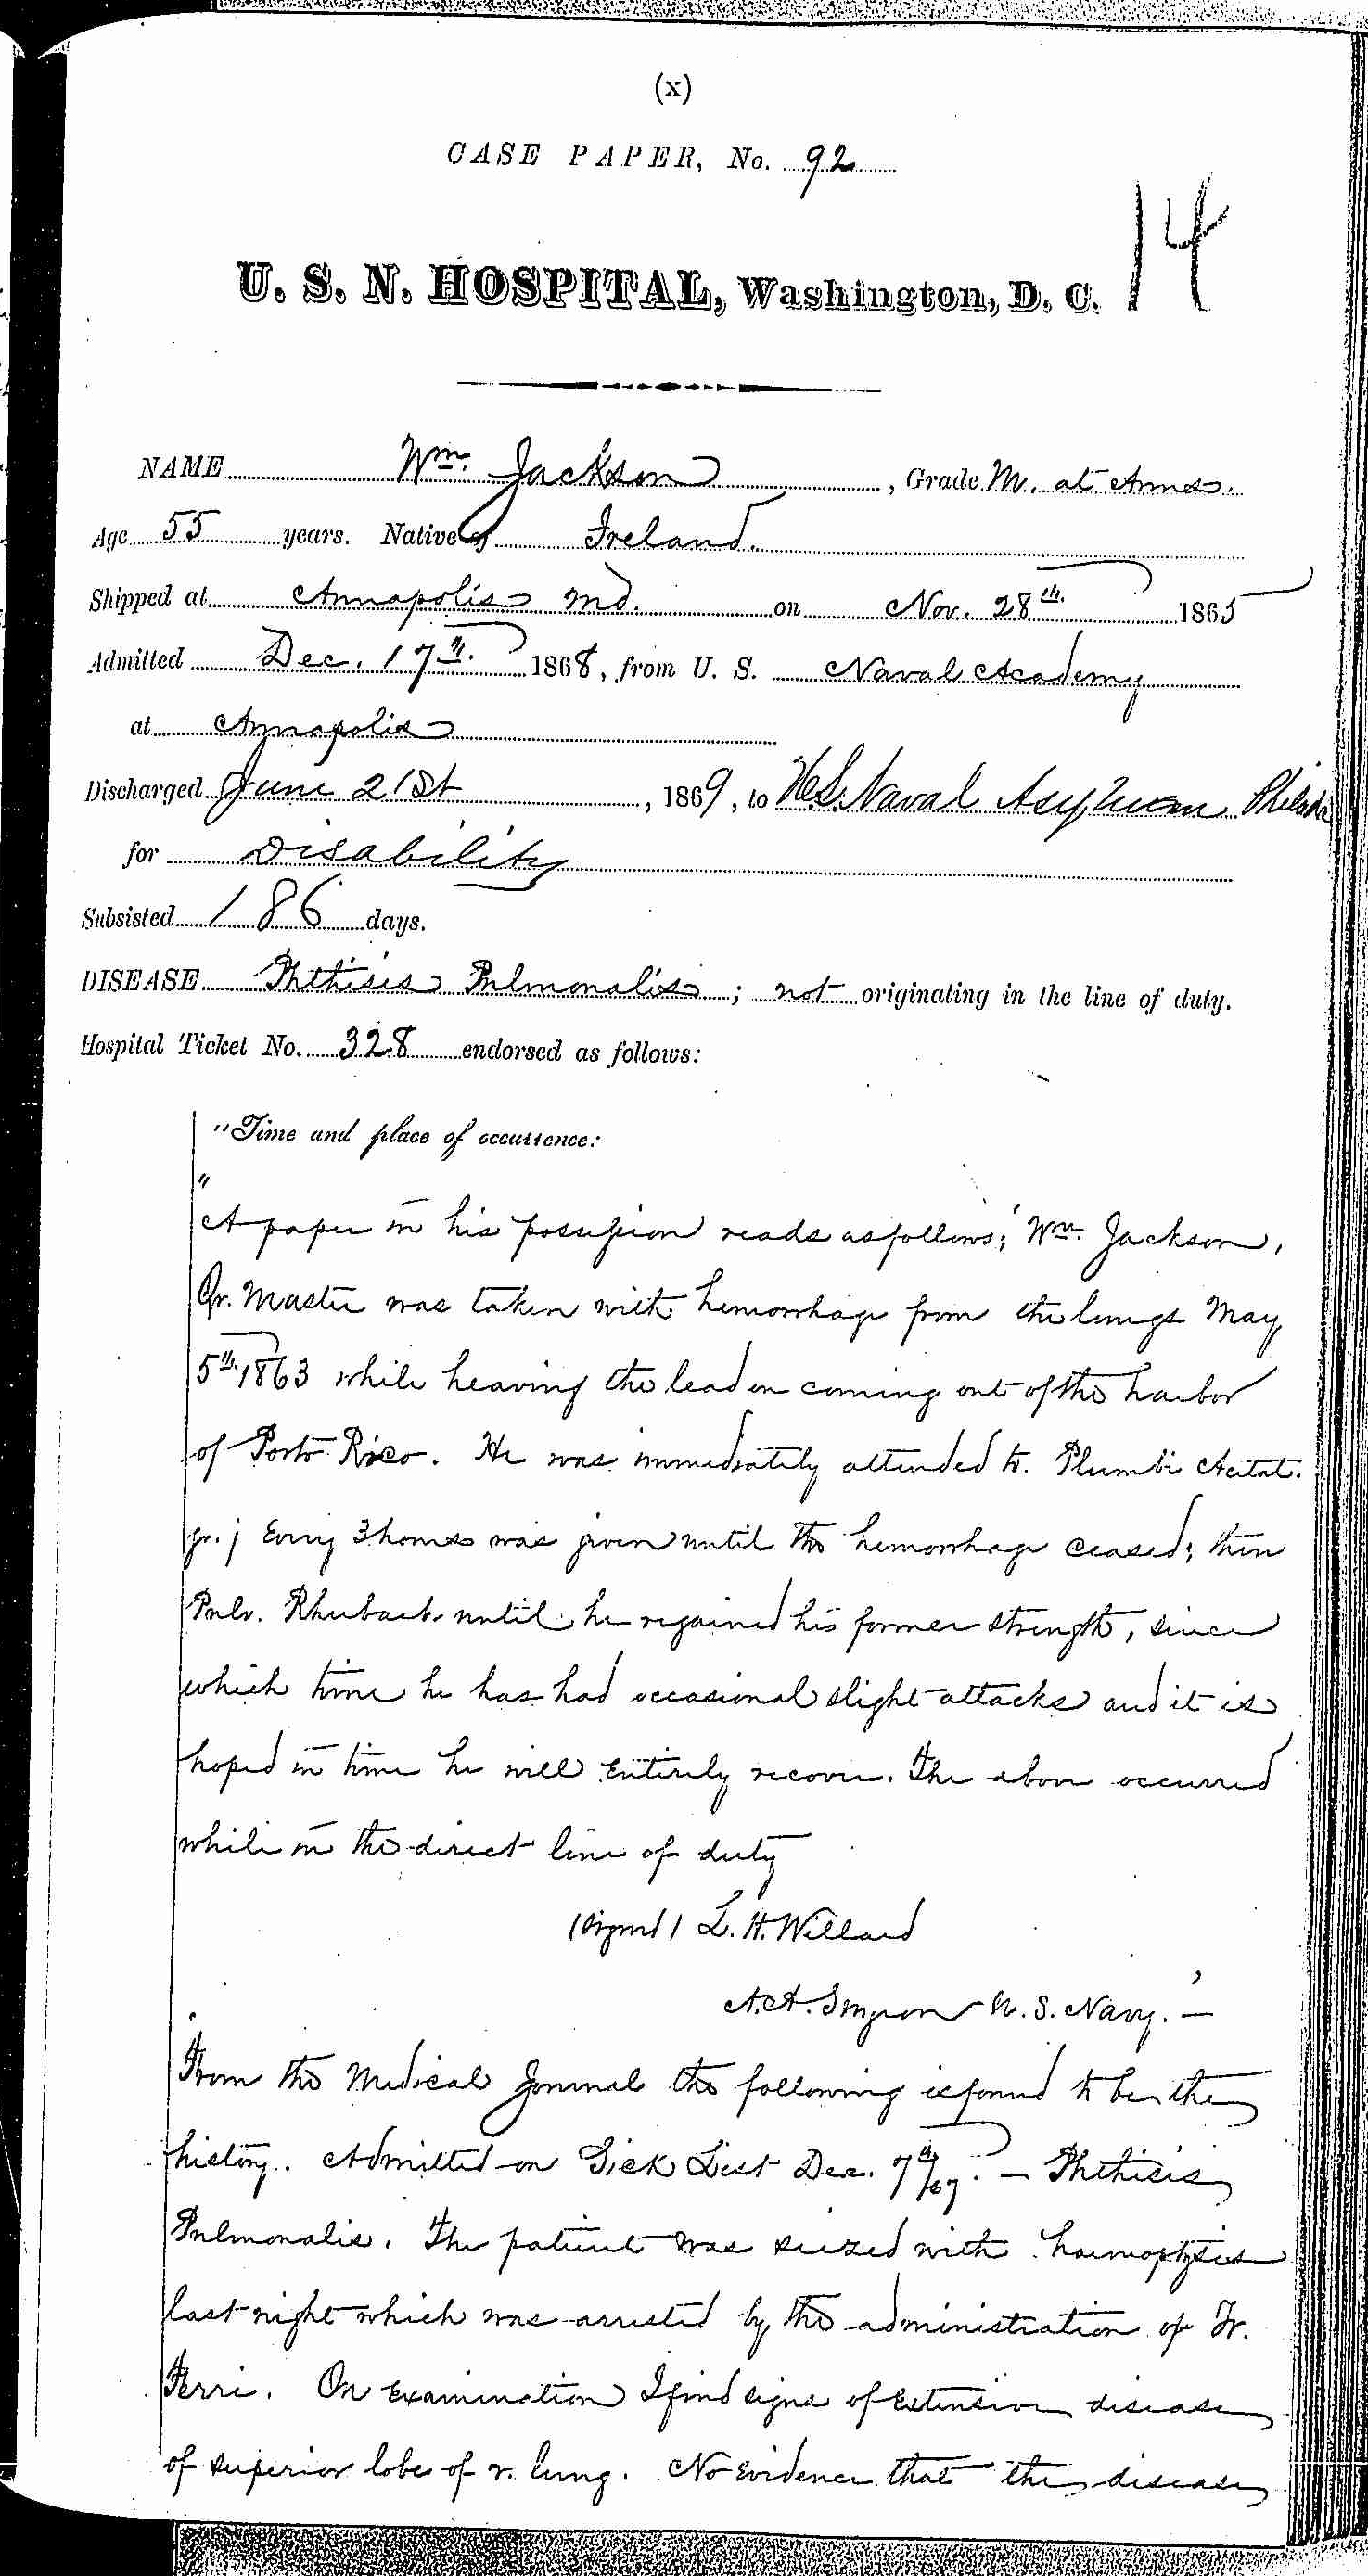 Entry for William Jackson (page 1 of 7) in the log Hospital Tickets and Case Papers - Naval Hospital - Washington, D.C. - 1868-69